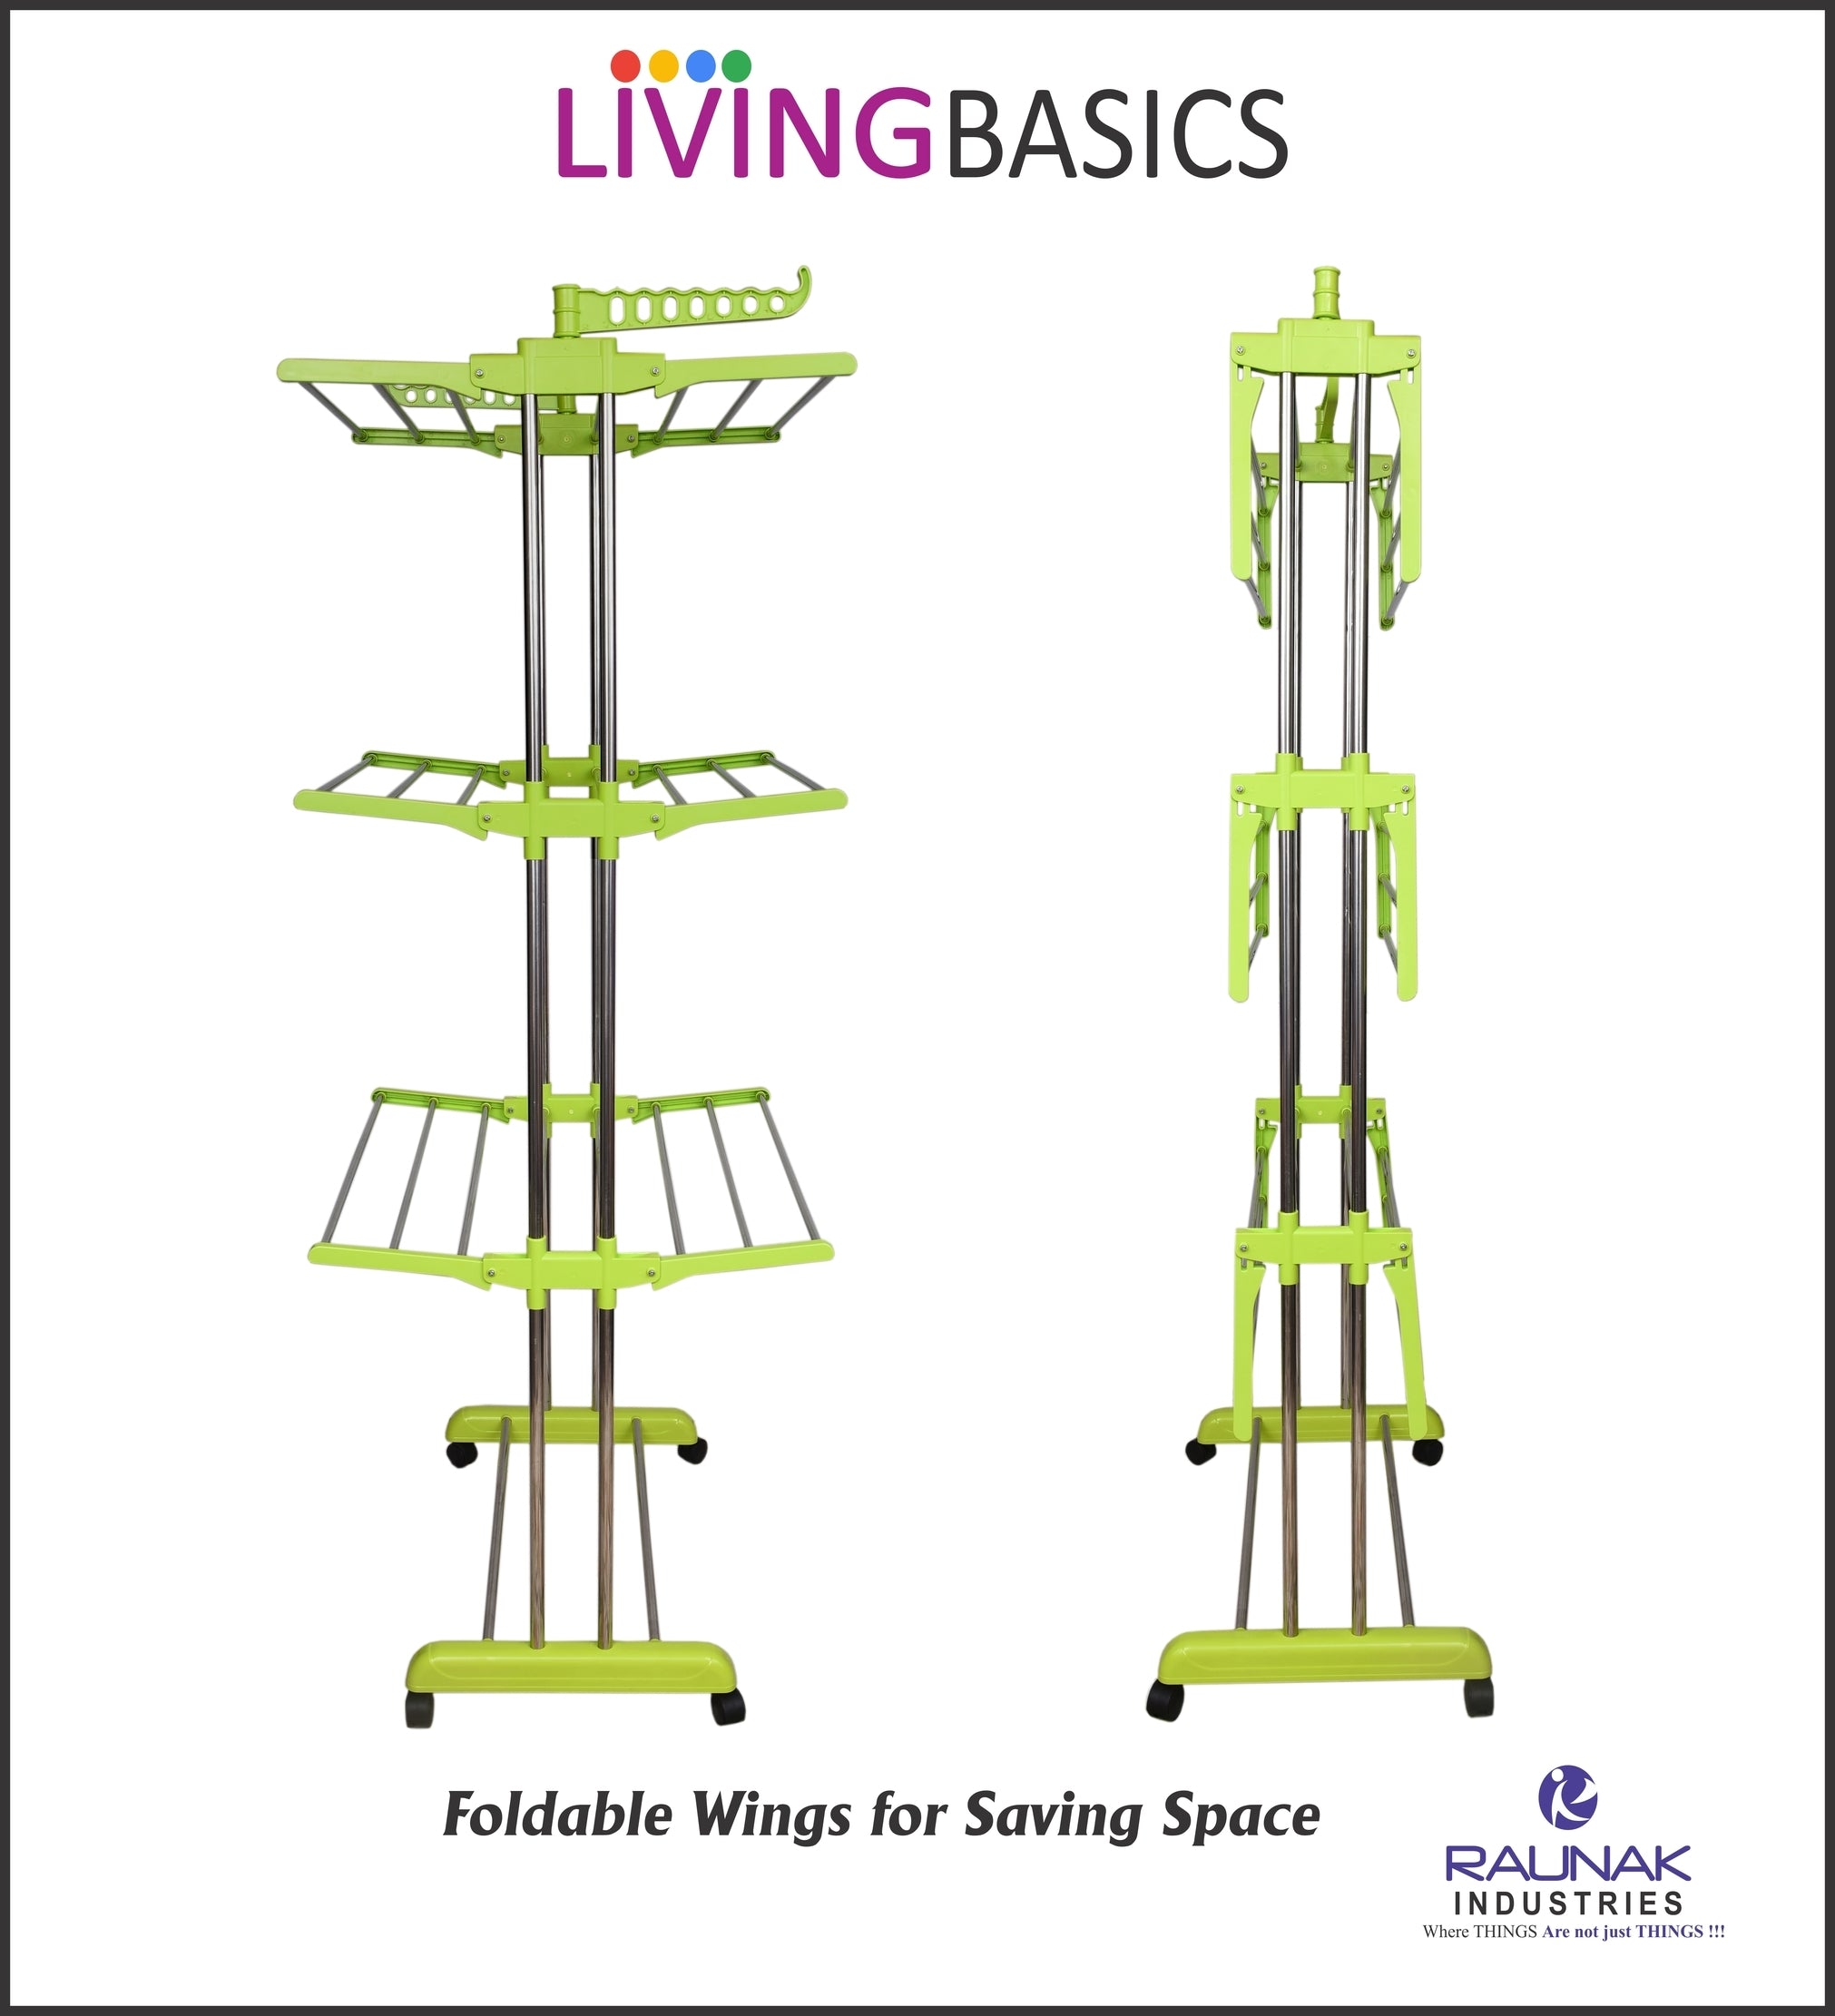 Products LivingBasics Stainless Steel Double Pole Foldable Clothes Drying Stand/Cloth Dryer Stands/Laundry Dry Rack with Wheels for Indoor/Outdoor/Balcony (Lime Green ) (ABS Plastic)